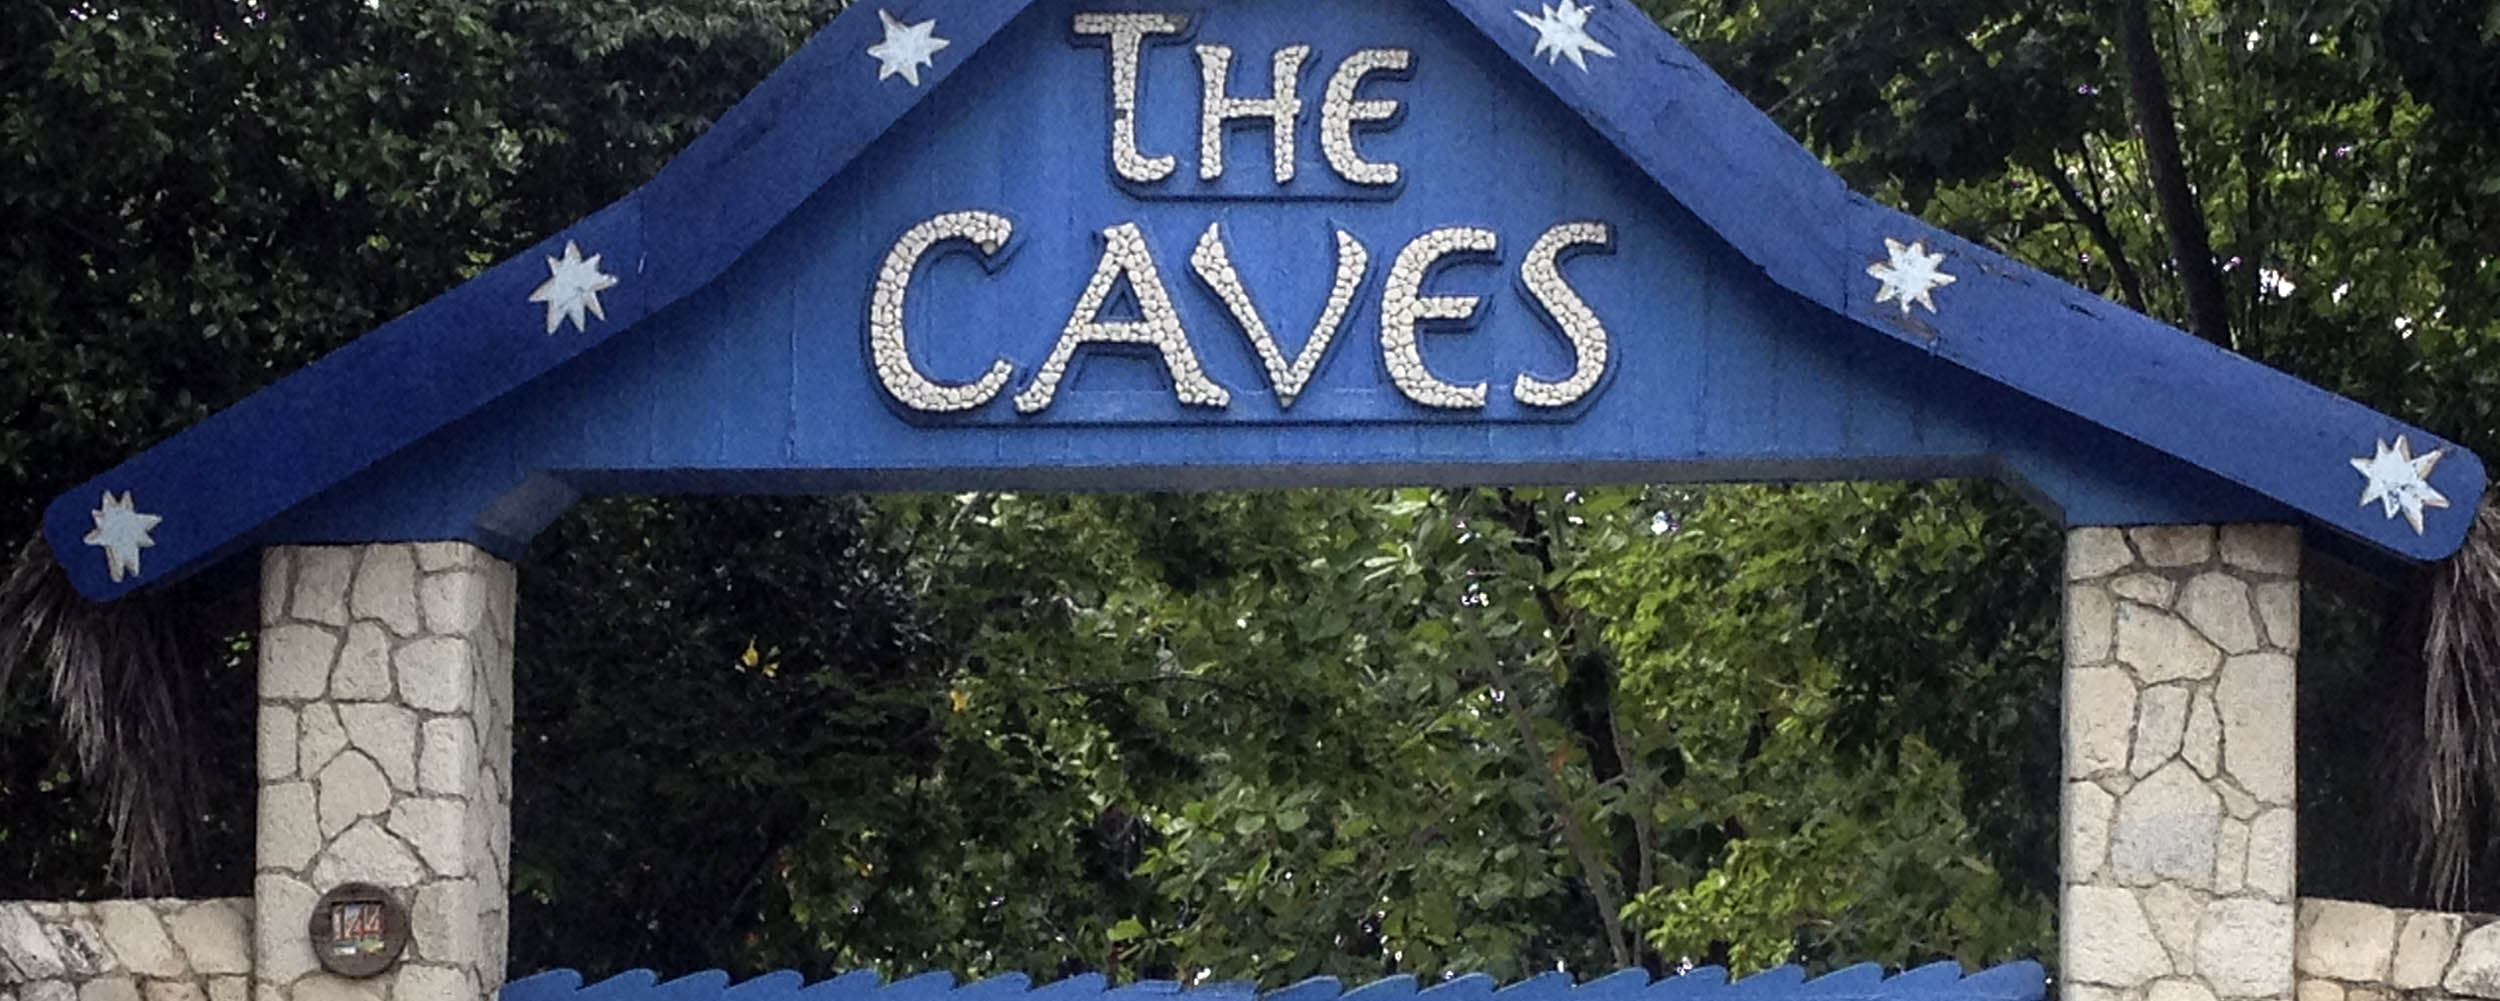 The Caves - Negril Jamaica